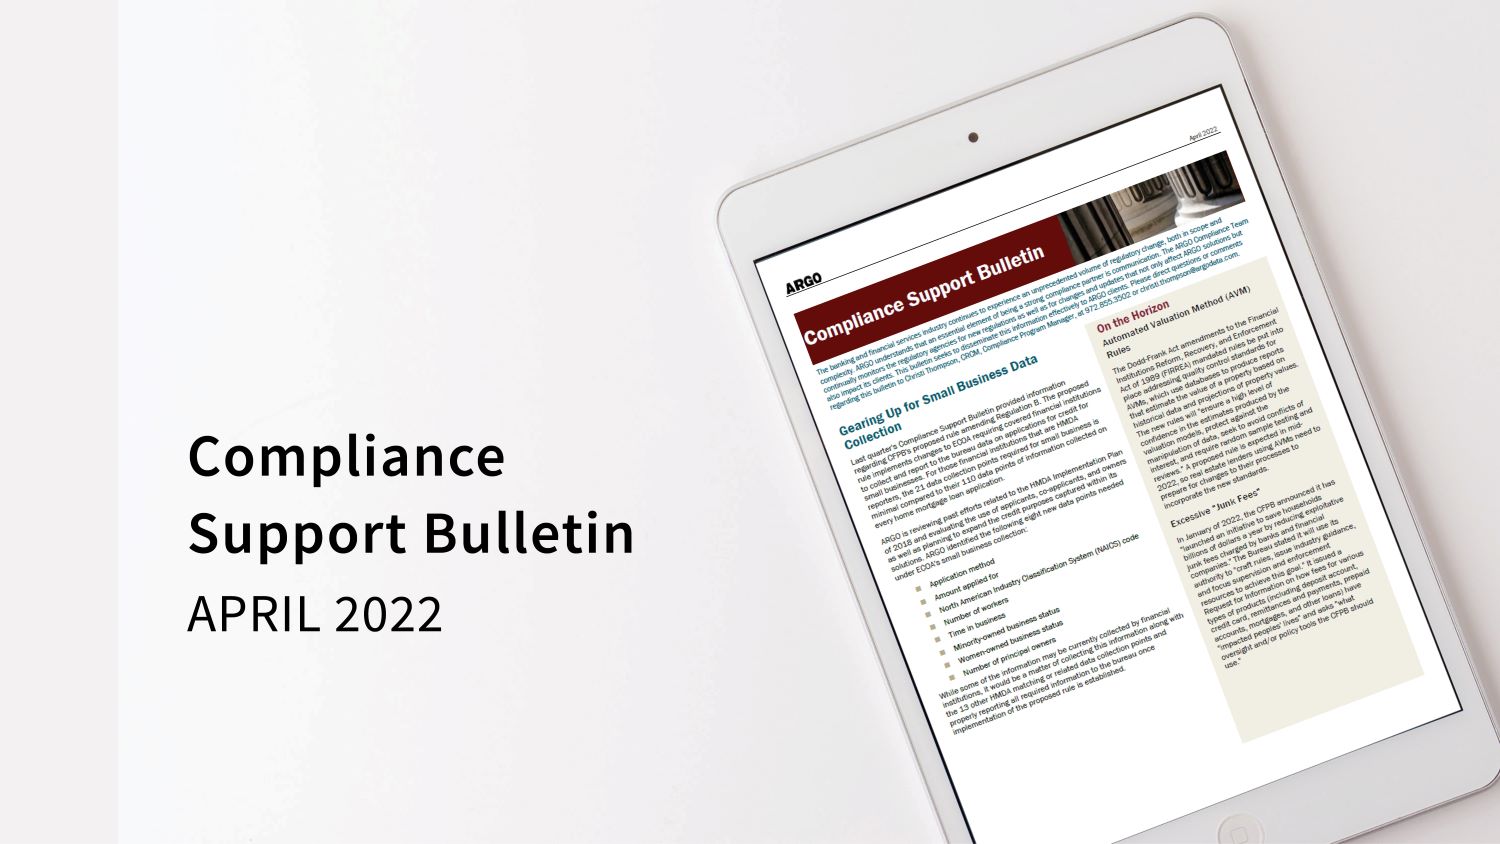 Compliance Support Bulletin April 2022 - RESIZED